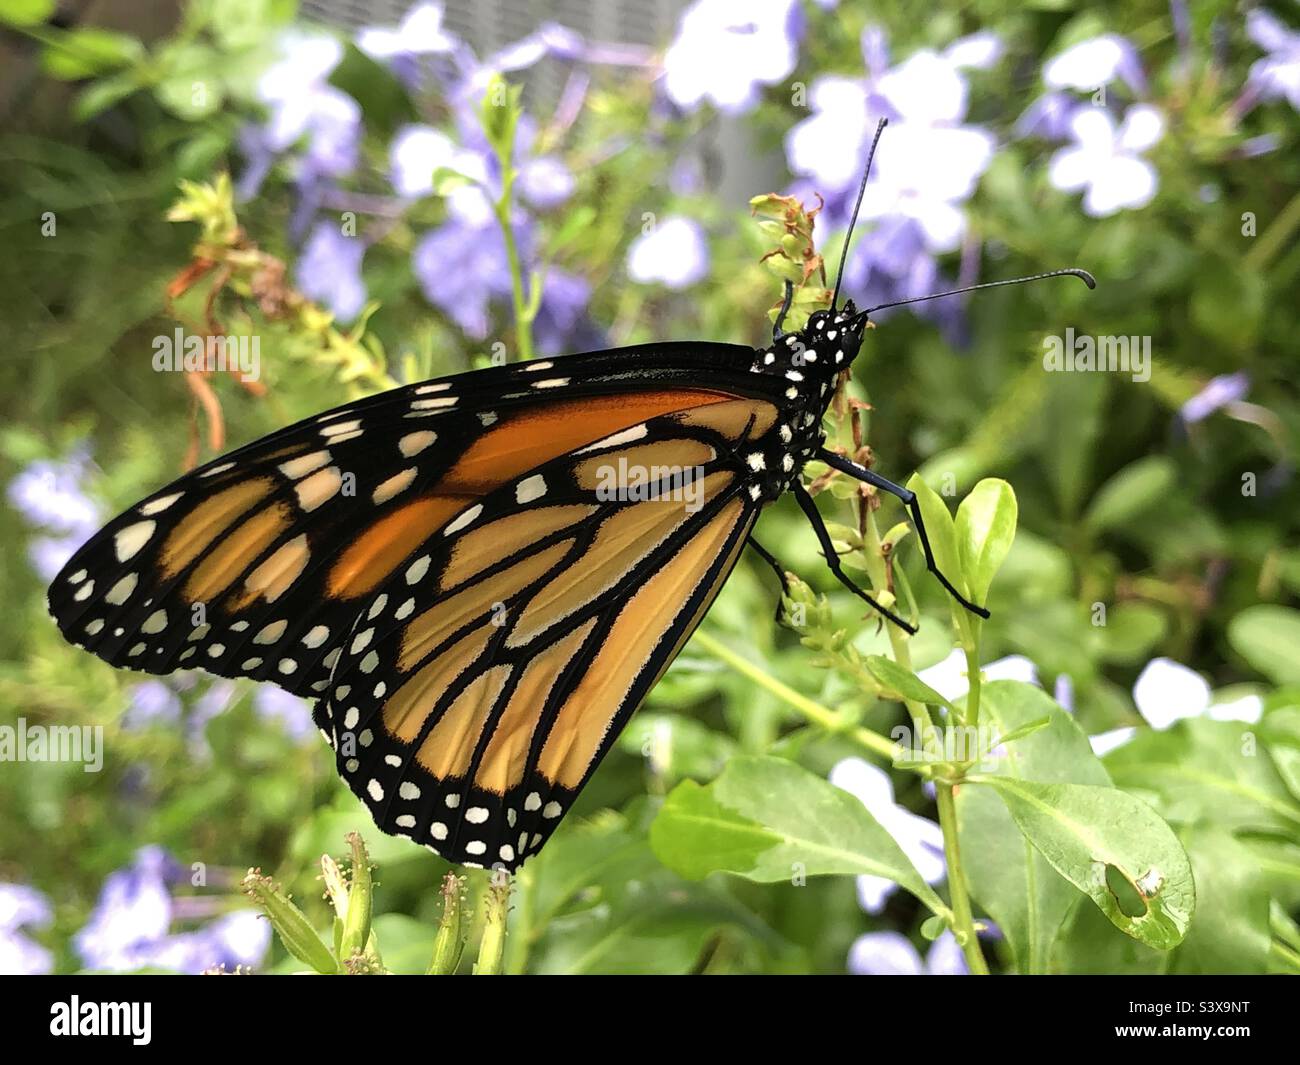 Newly released endangered species male Monarch butterfly on a plumbago plant in Ponte Vedra Beach Florida USA. Stock Photo